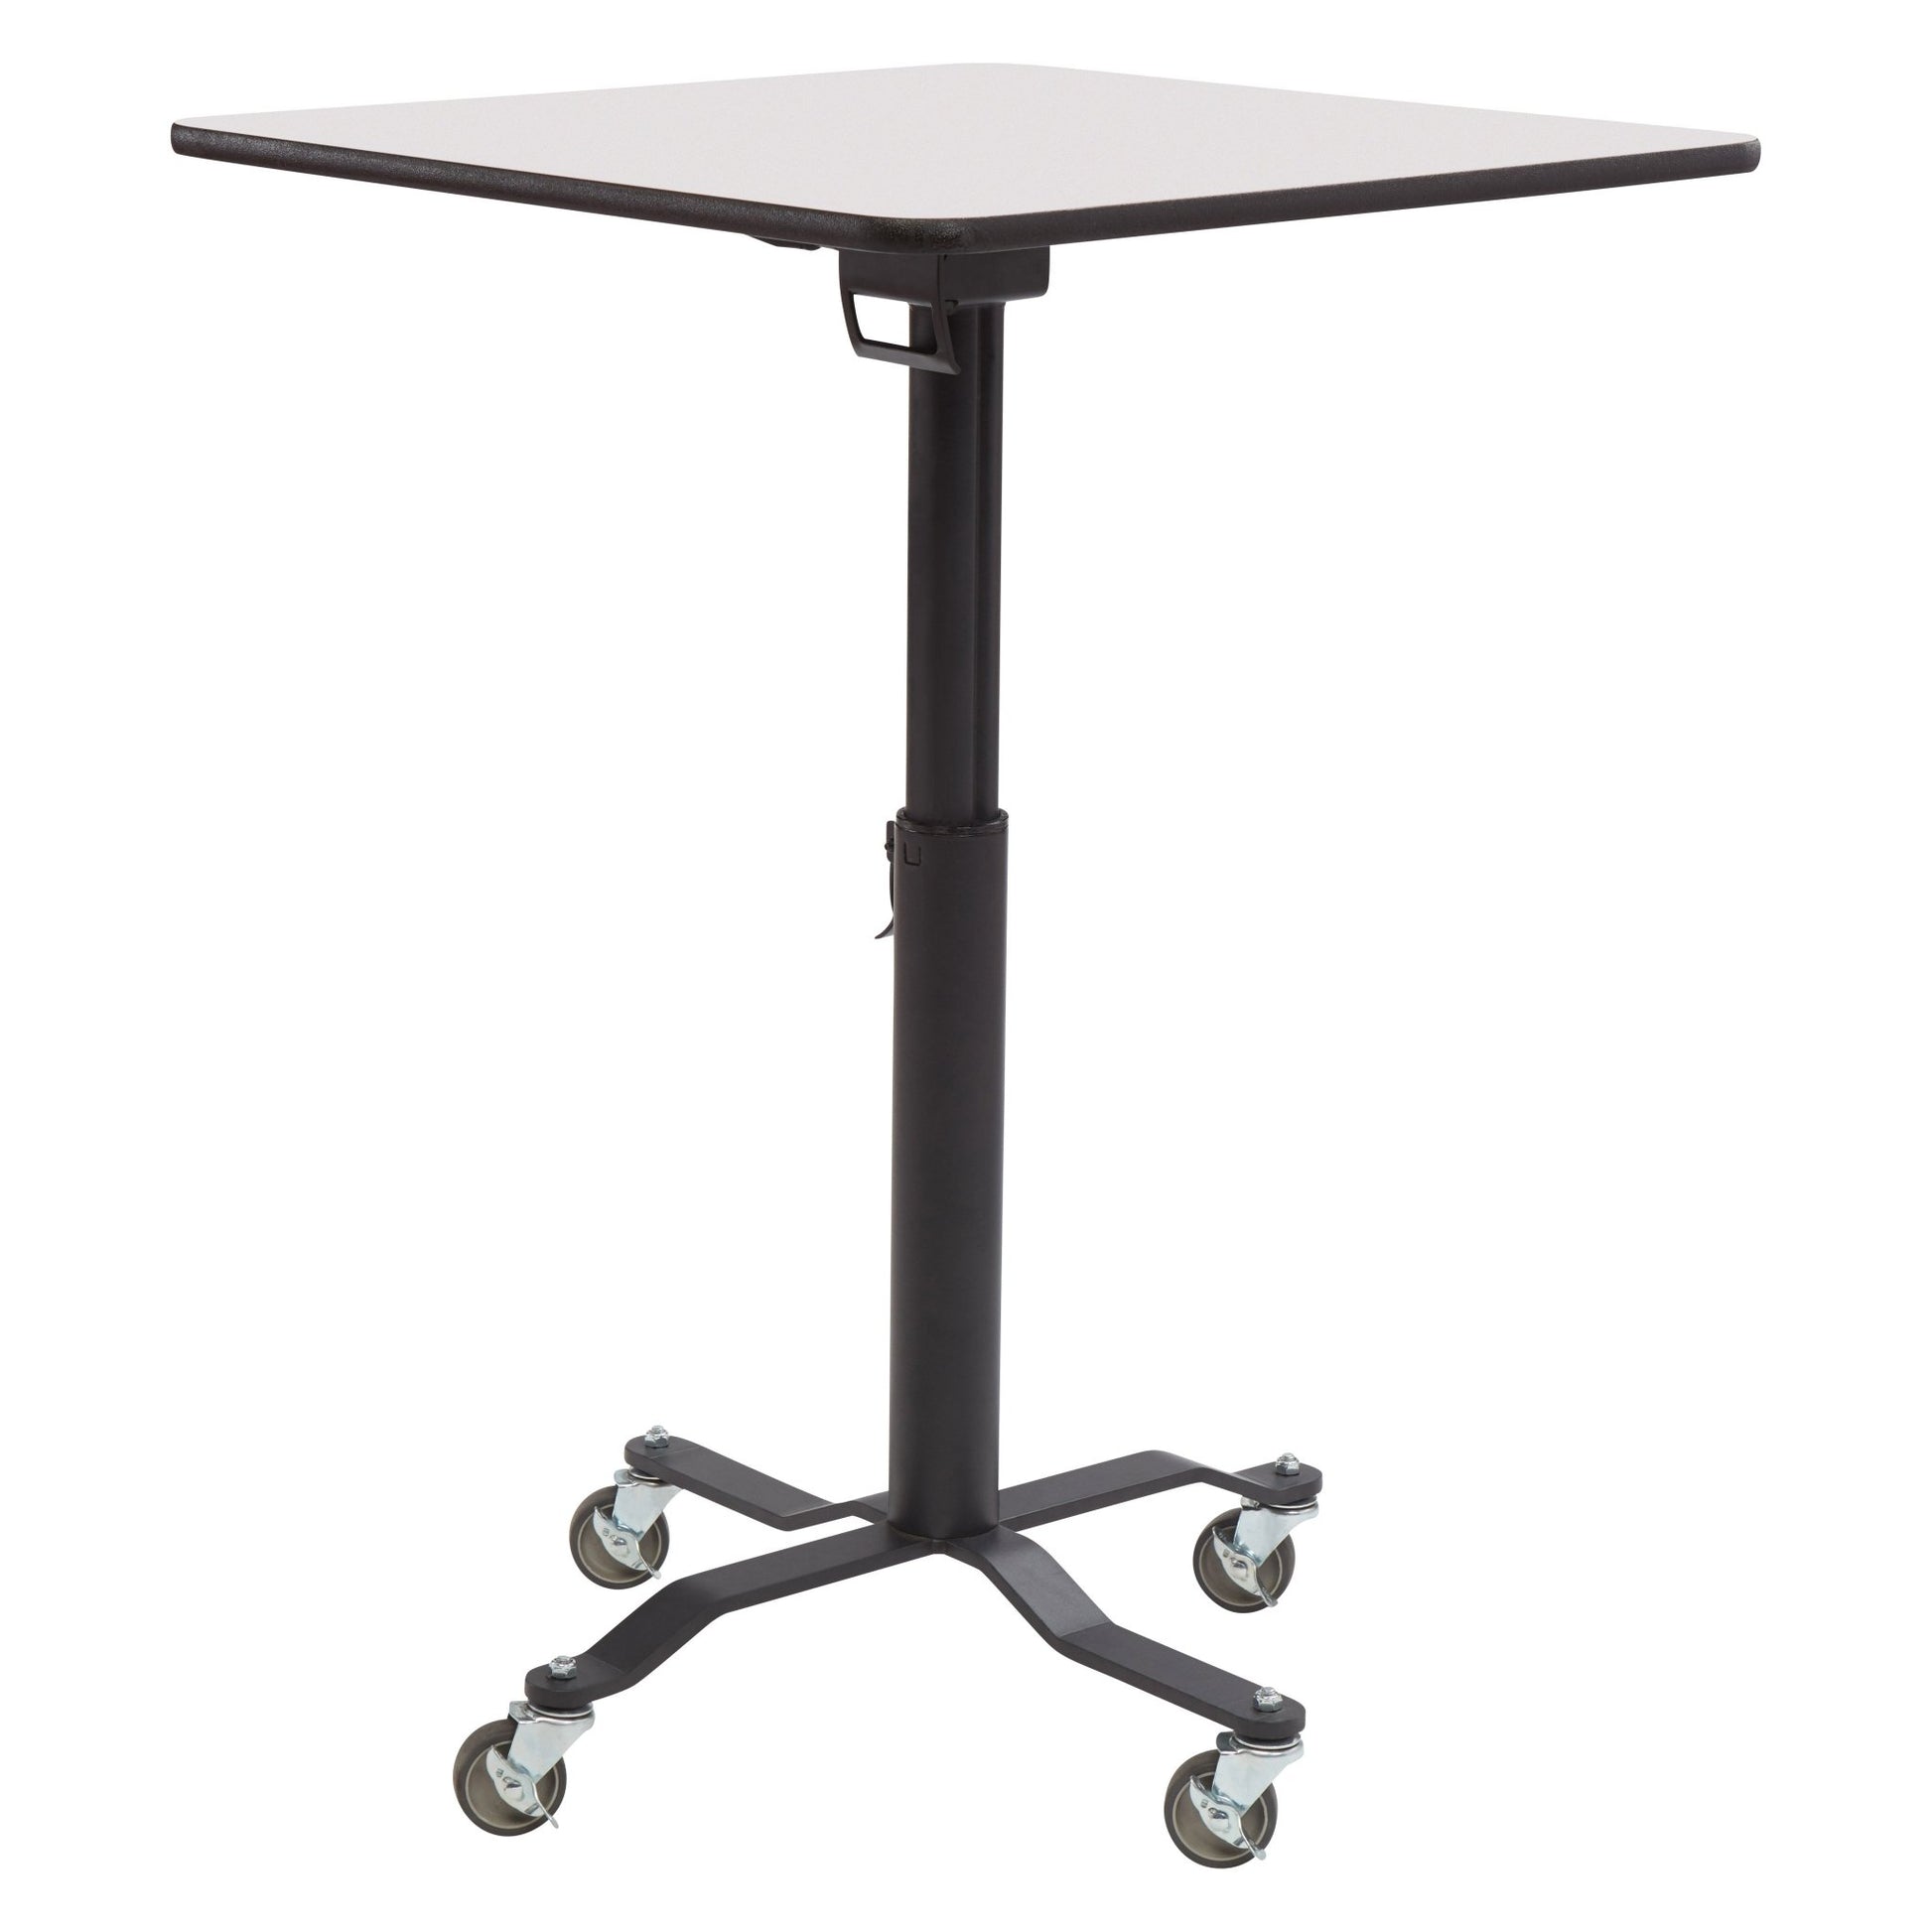 NPS Cafe Time II Table, 36" Square, Whiteboard Top, MDF Core, Protect Edge (NationalPublic Seating NPS-PCT336MDPEWB) - SchoolOutlet